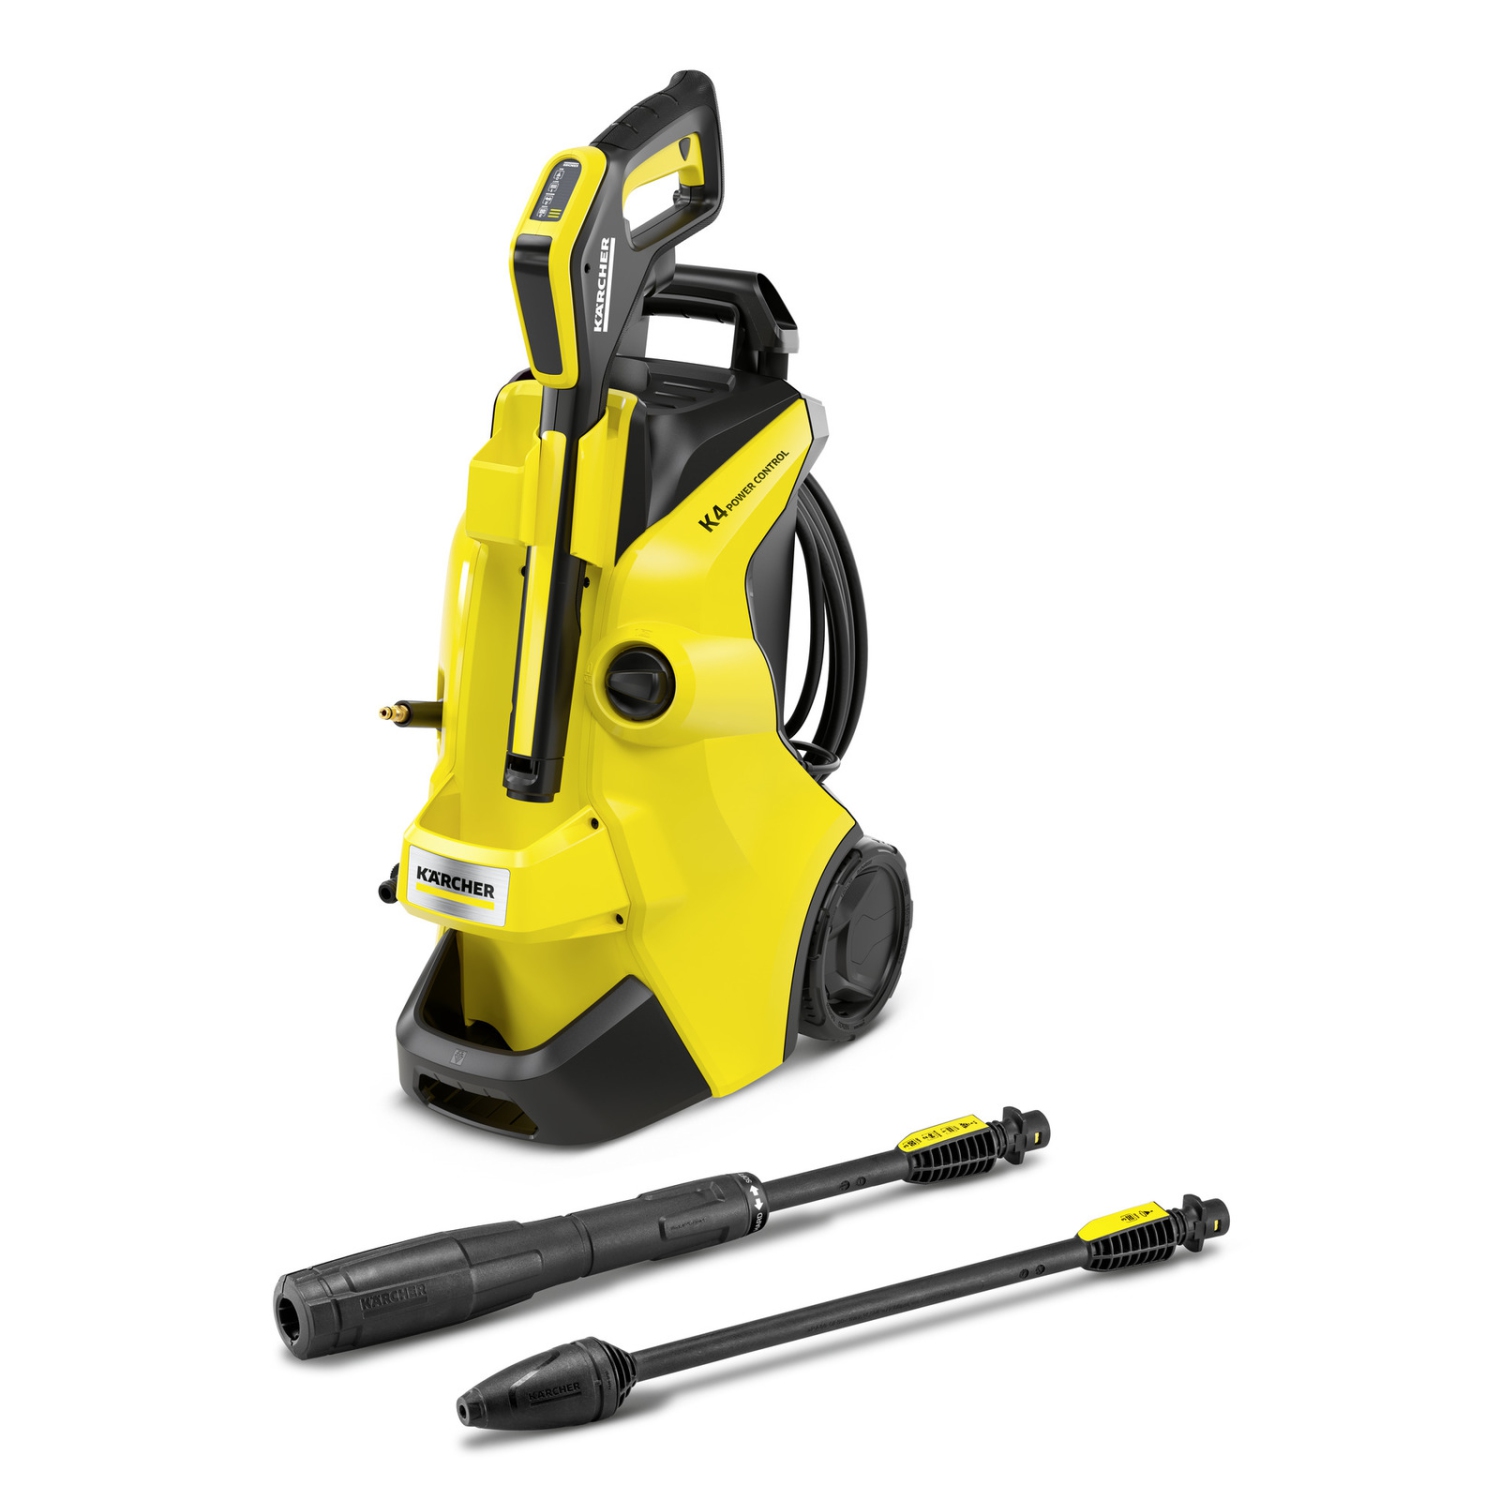 Karcher Electric Pressure Washer K 4 Power Control with 1900 PSI, Karcher App Compatibility and Plug and Clean Detergent System